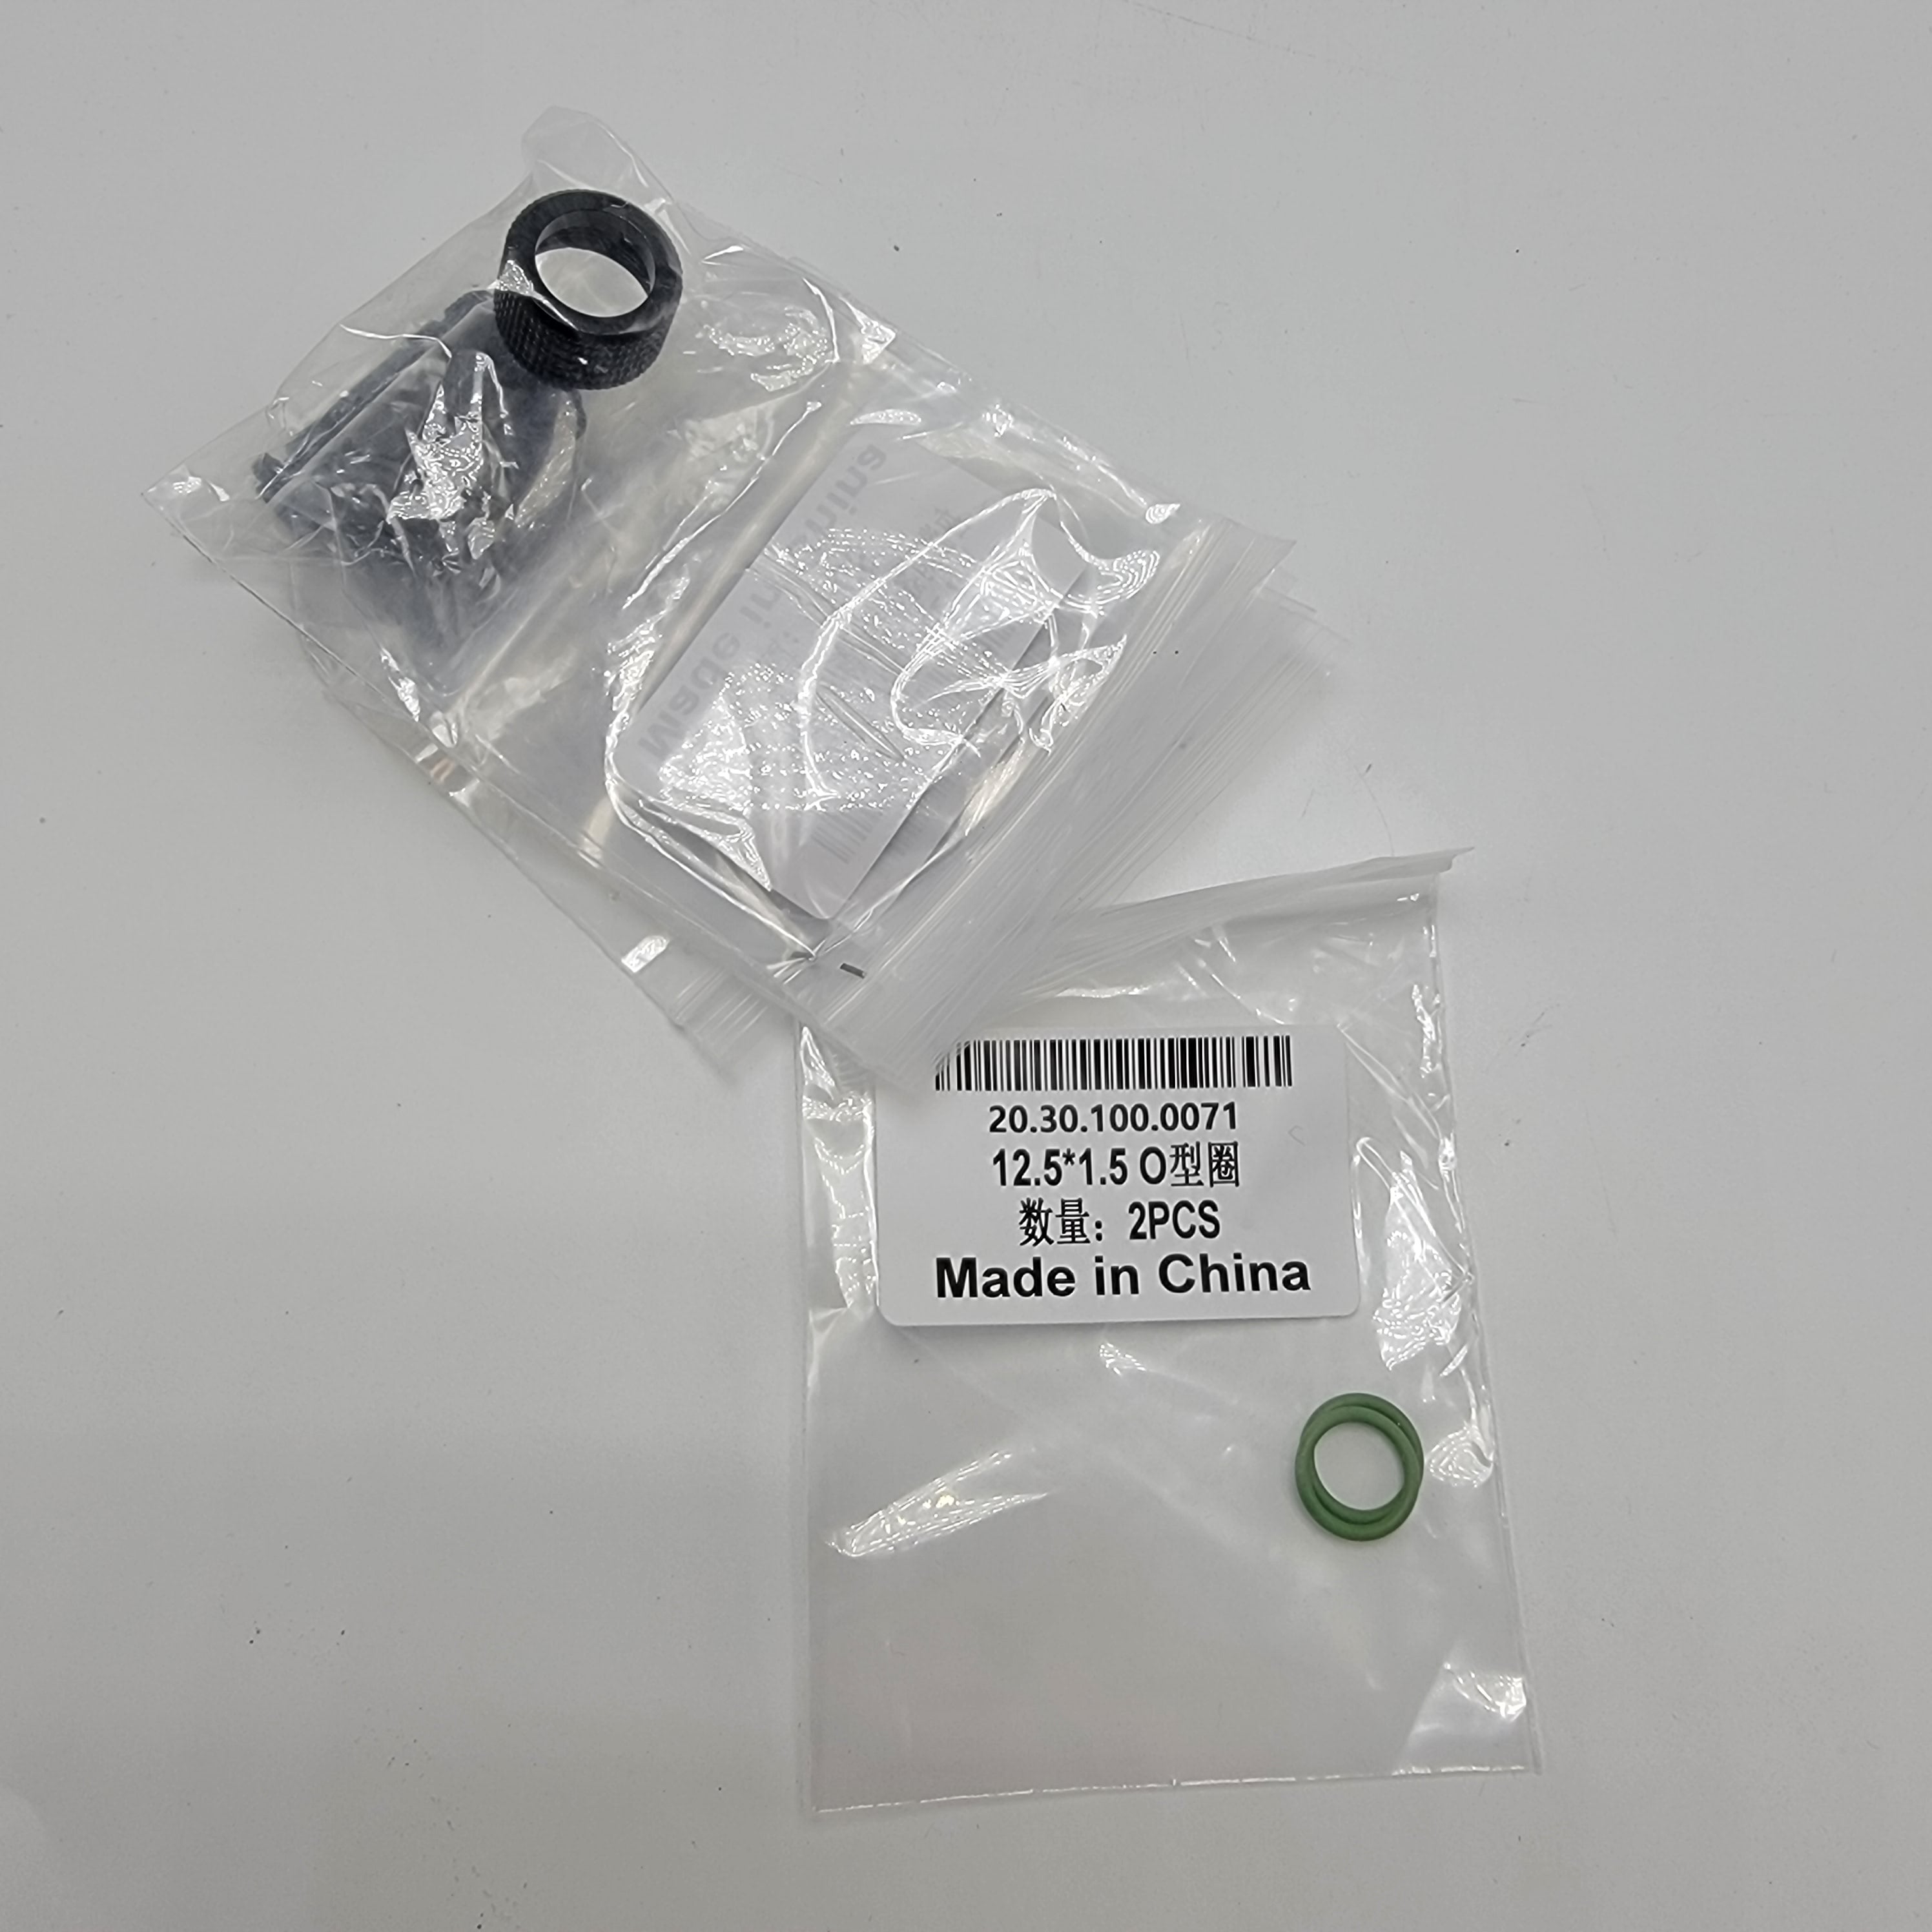 Chasing - OEM Tether Connector for Pro Max